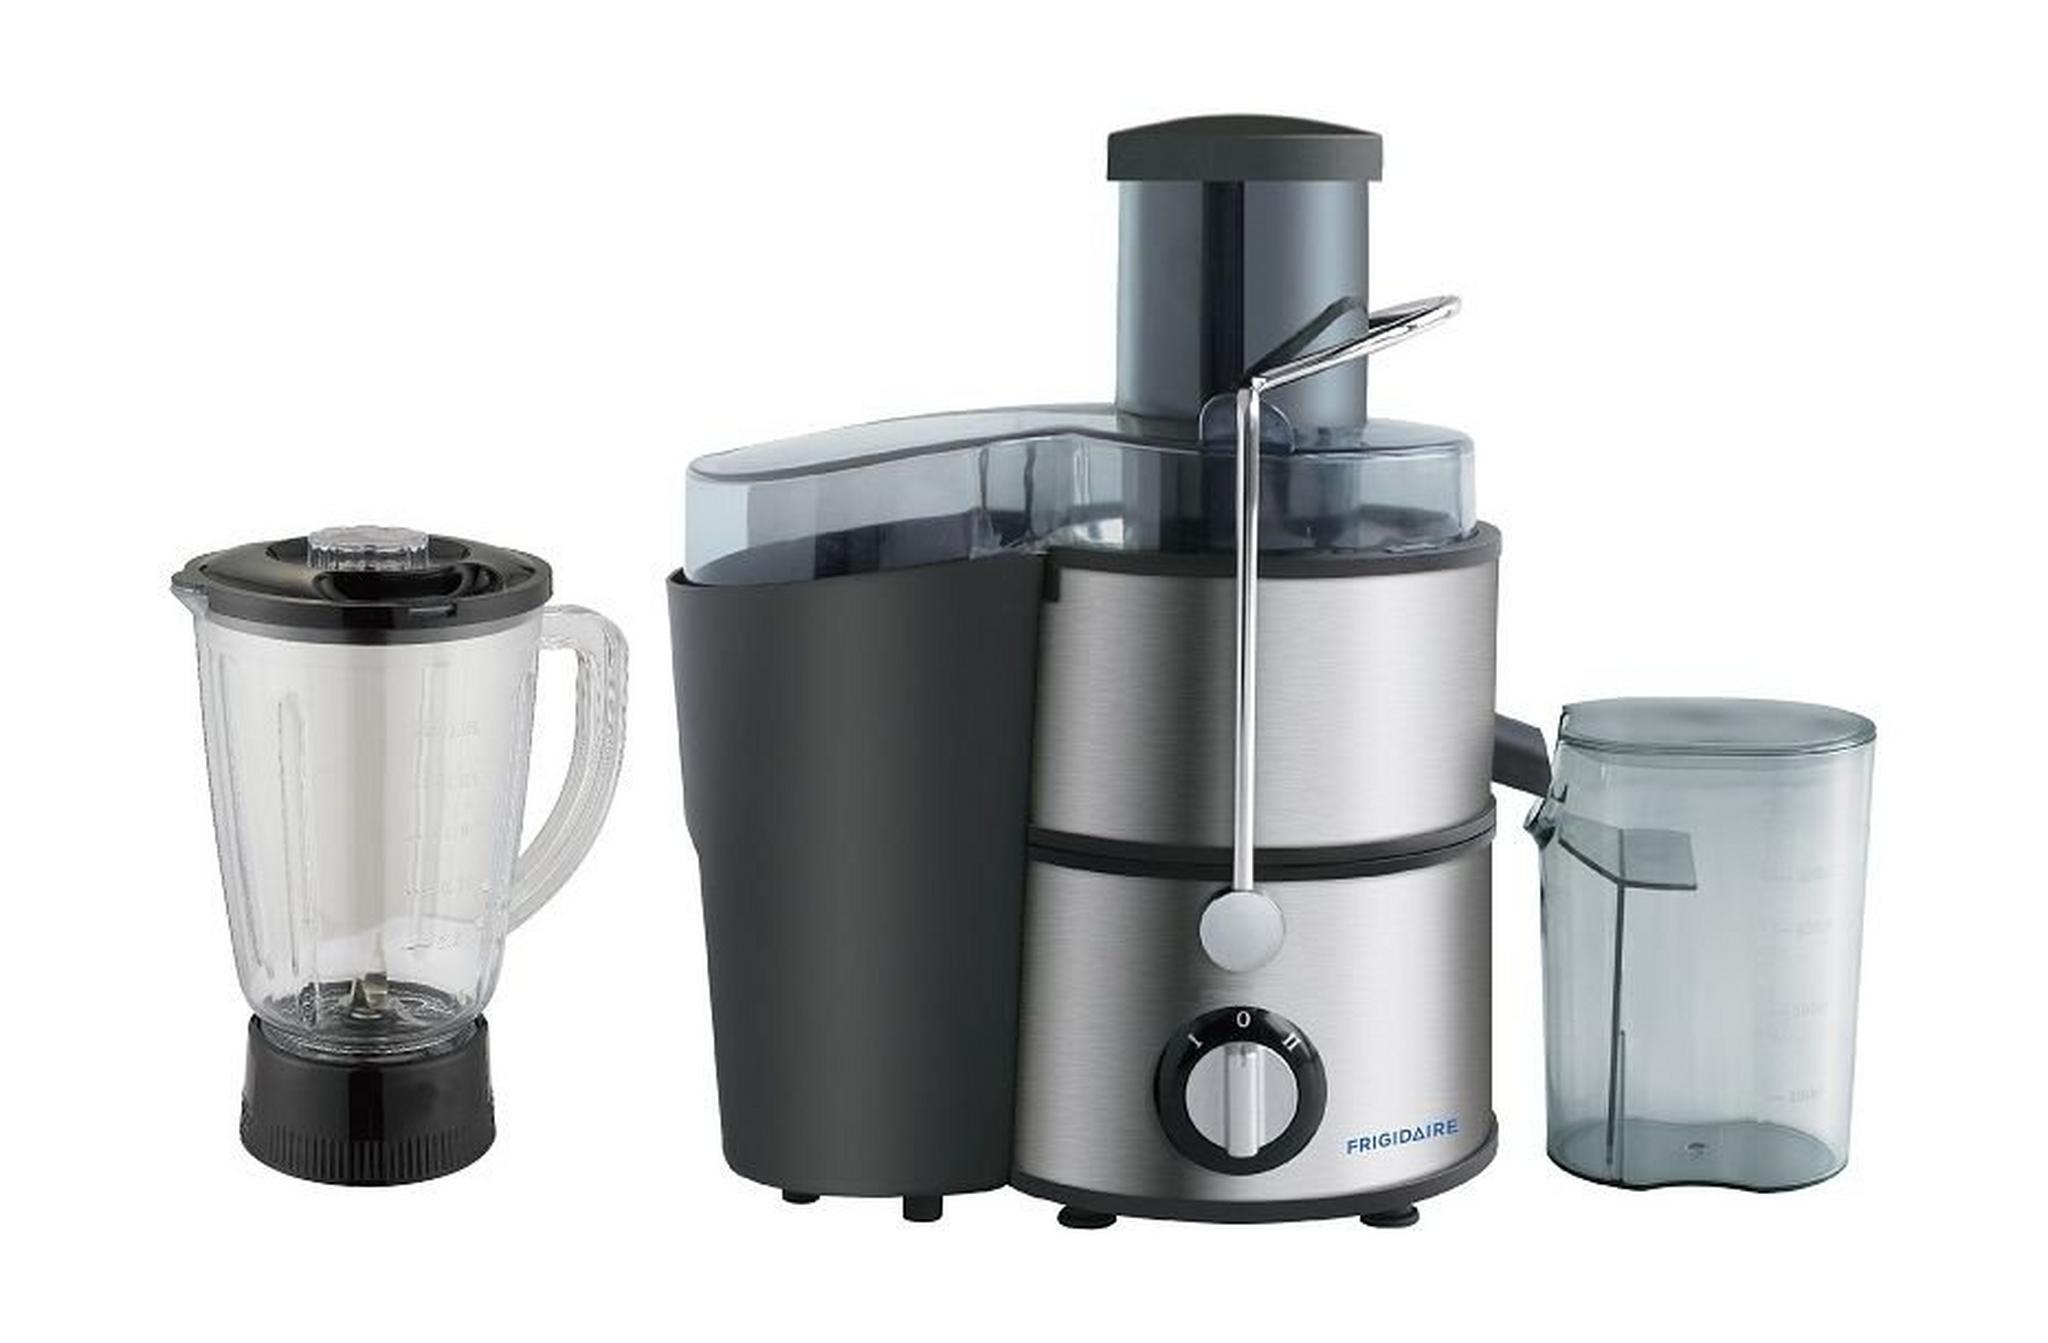 Frigidaire Juicer Extractor with Blender, 400W, 1.5L, FD5181 - Stainless Steel